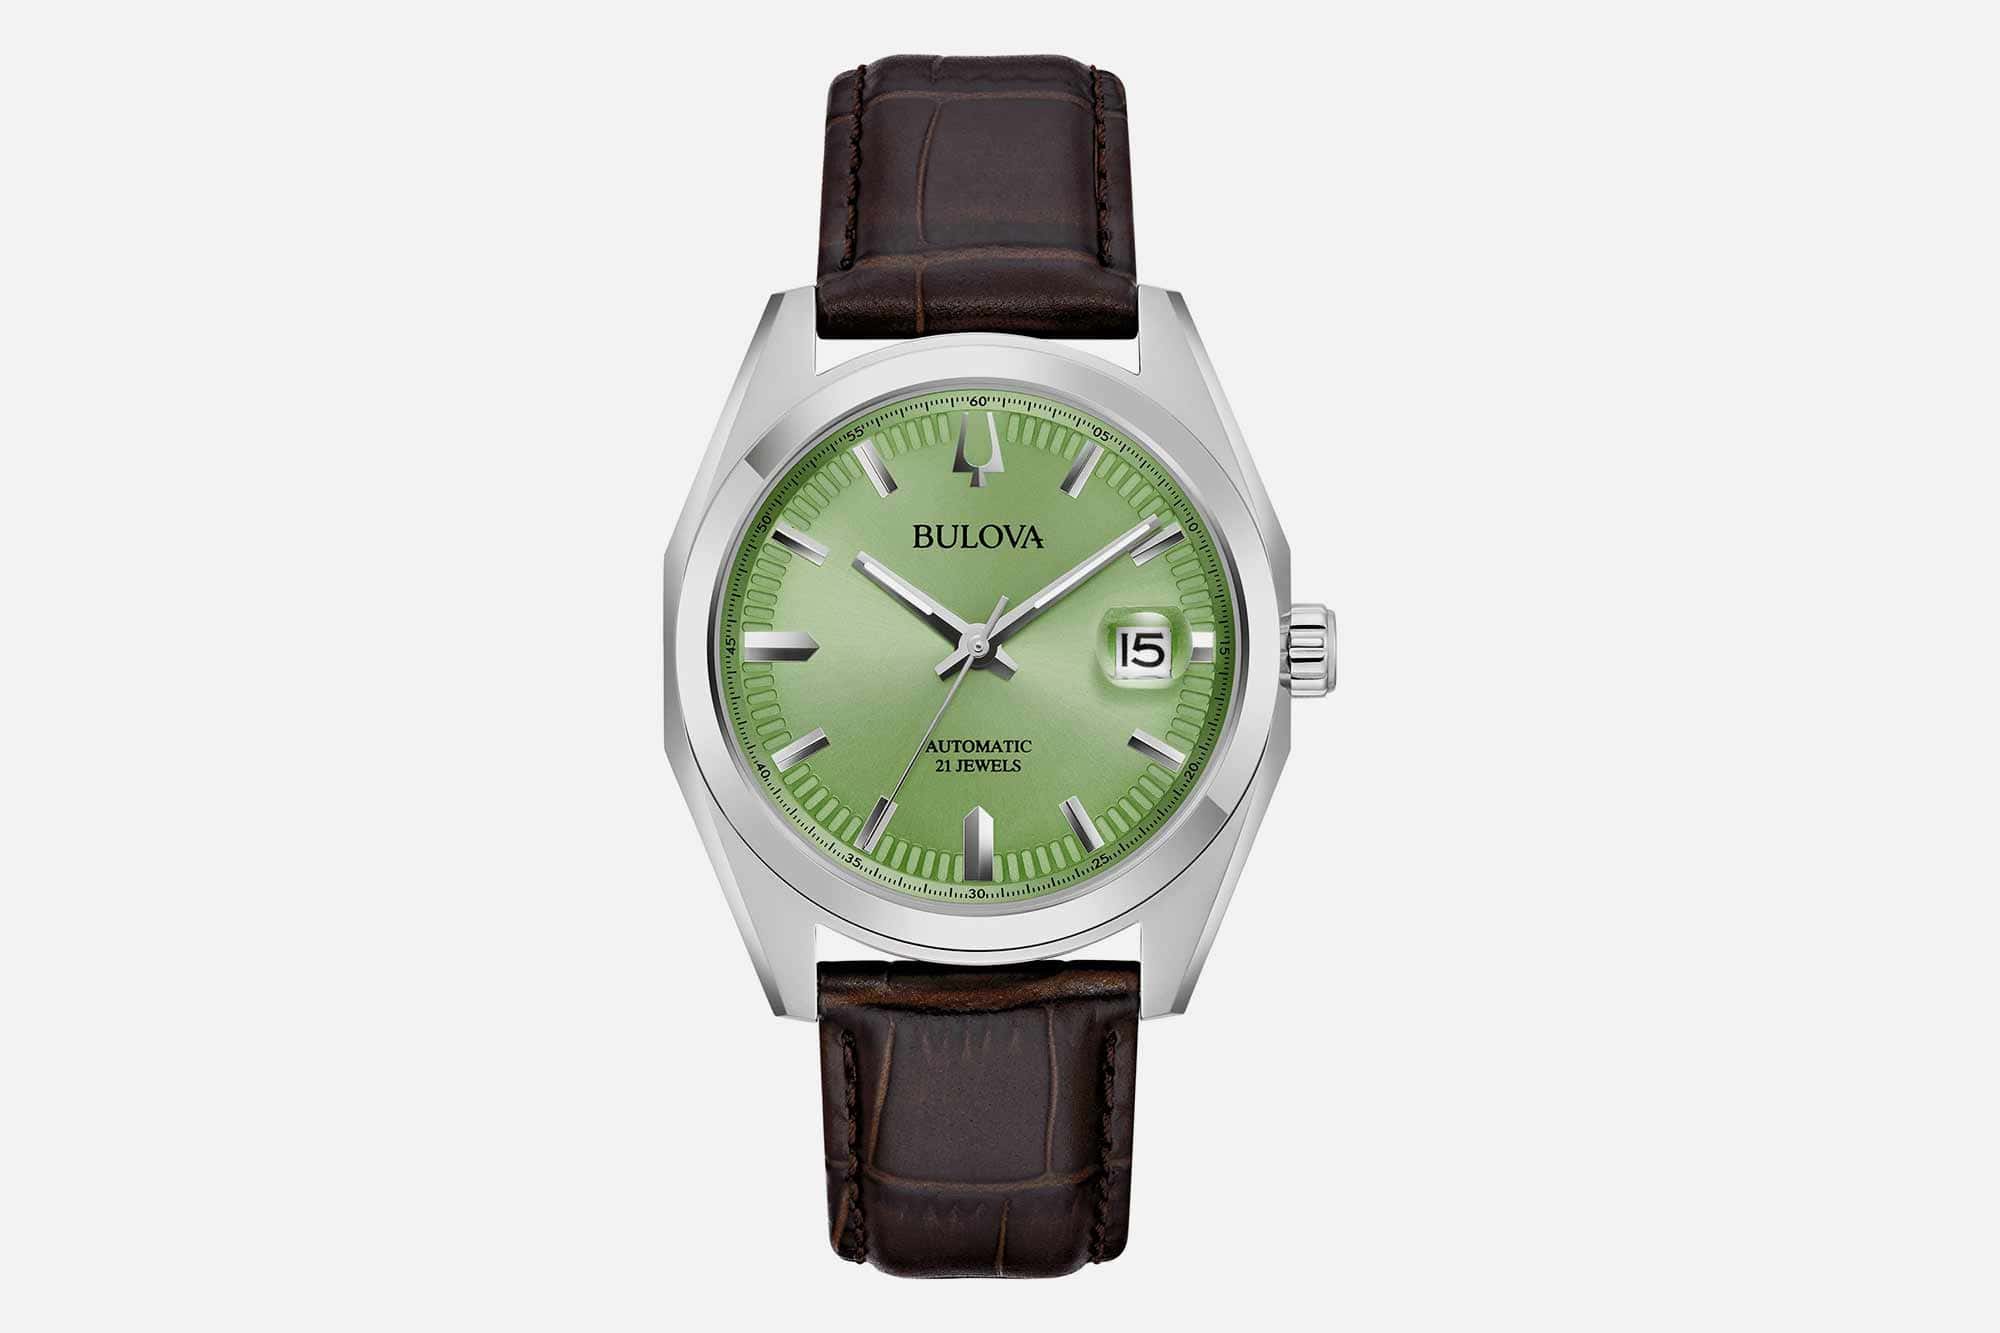 Bulova Adds New References to their Surveyor Collection